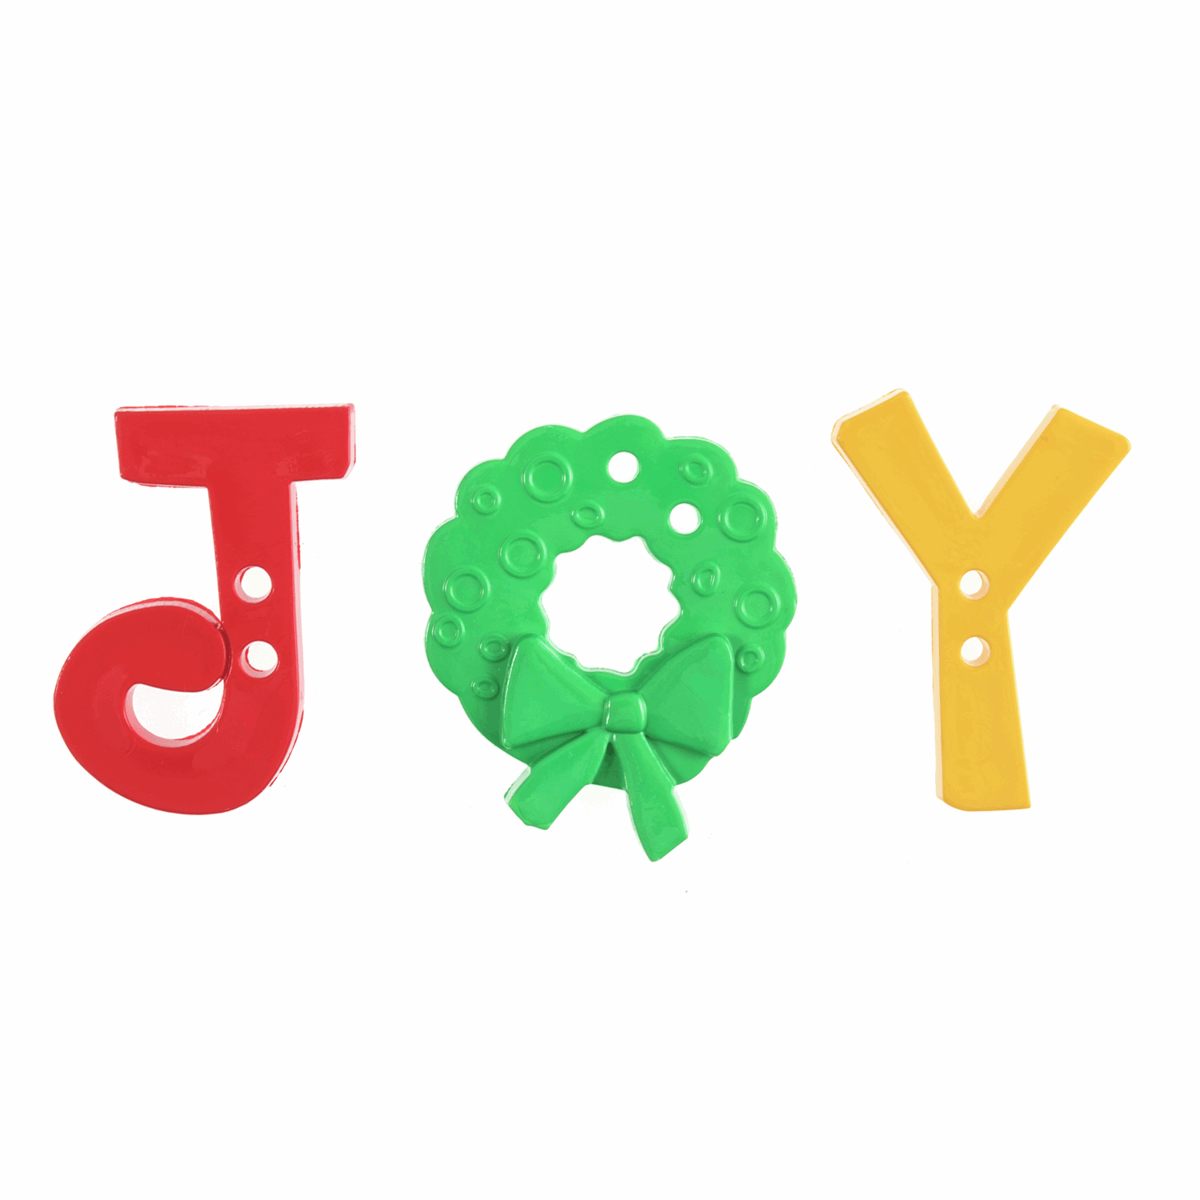 Wooden JOY Buttons - Sew-On or Glue-On